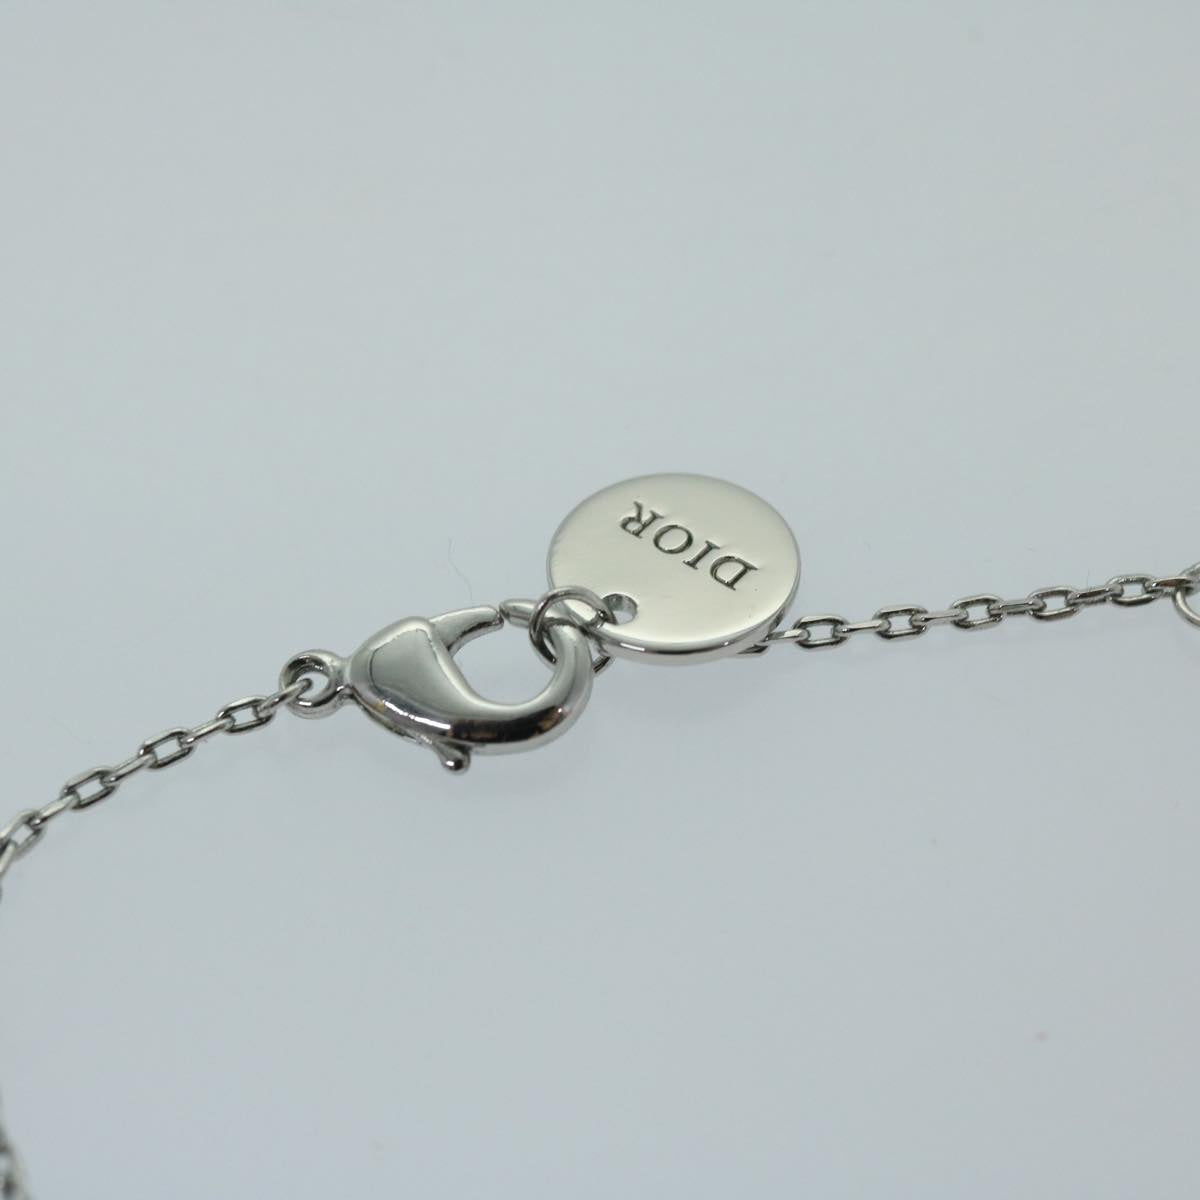 Christian Dior Necklace metal Silver Auth am5919